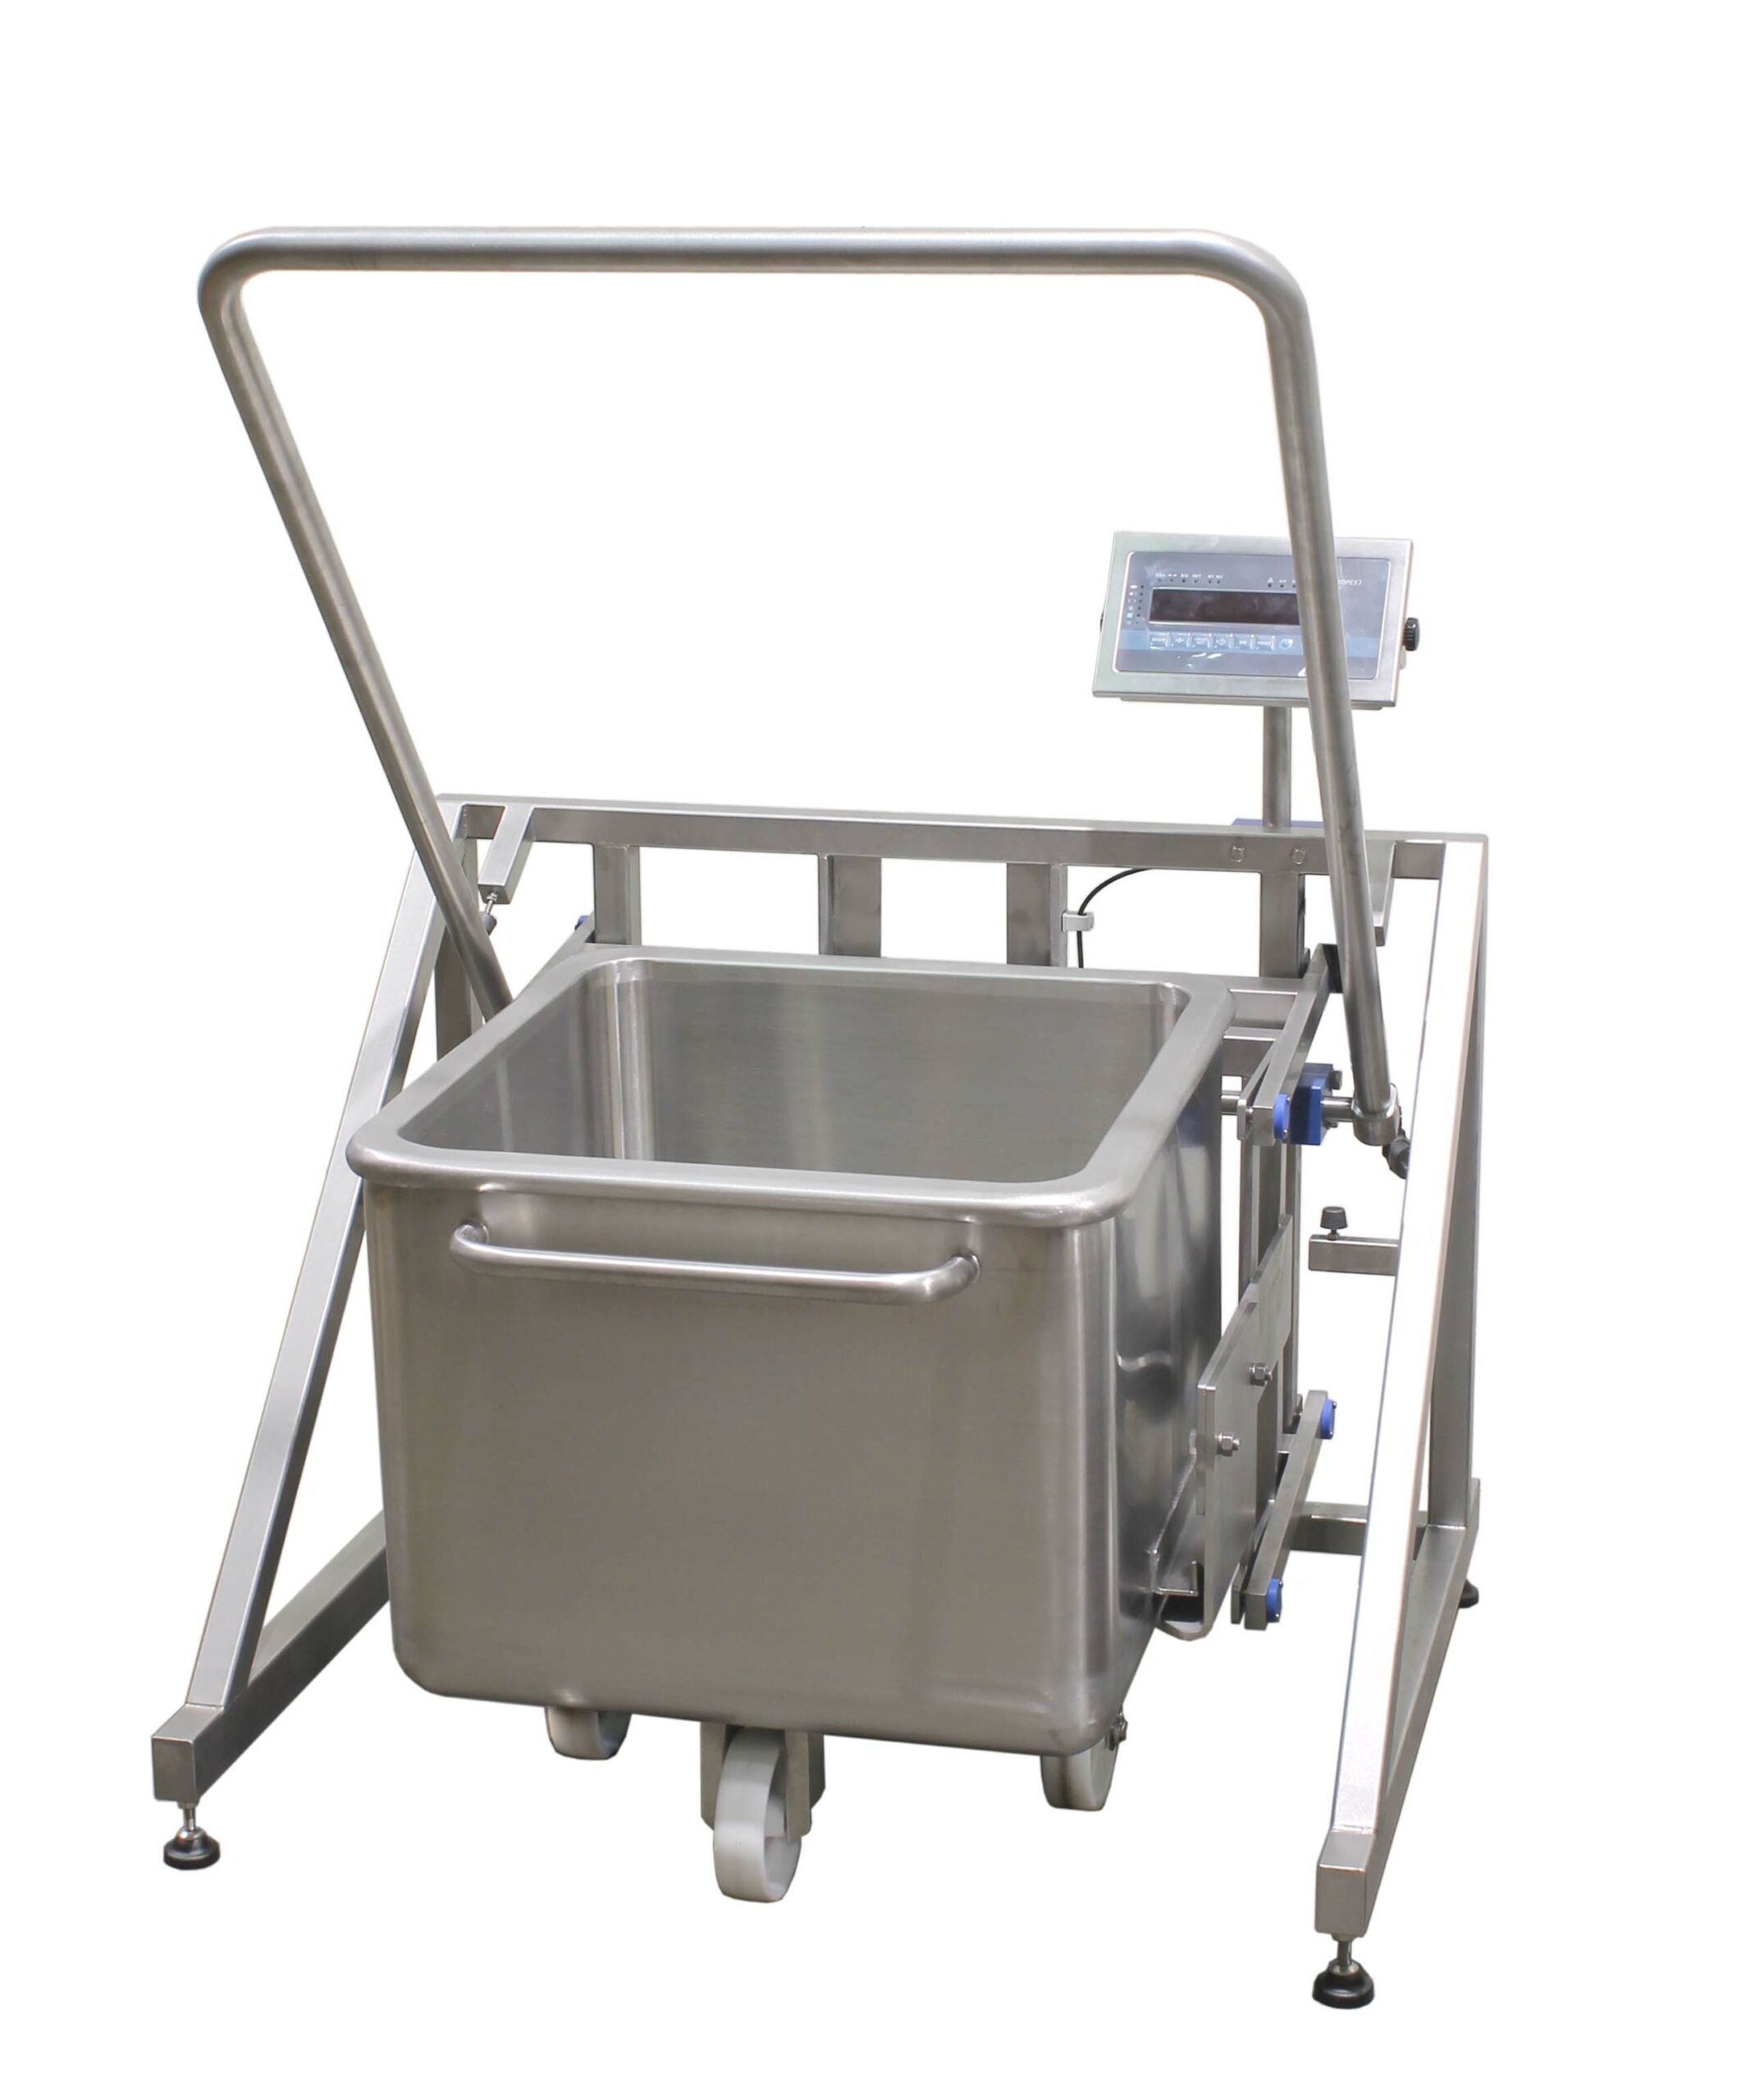 Weighing scale for 200L tote bin